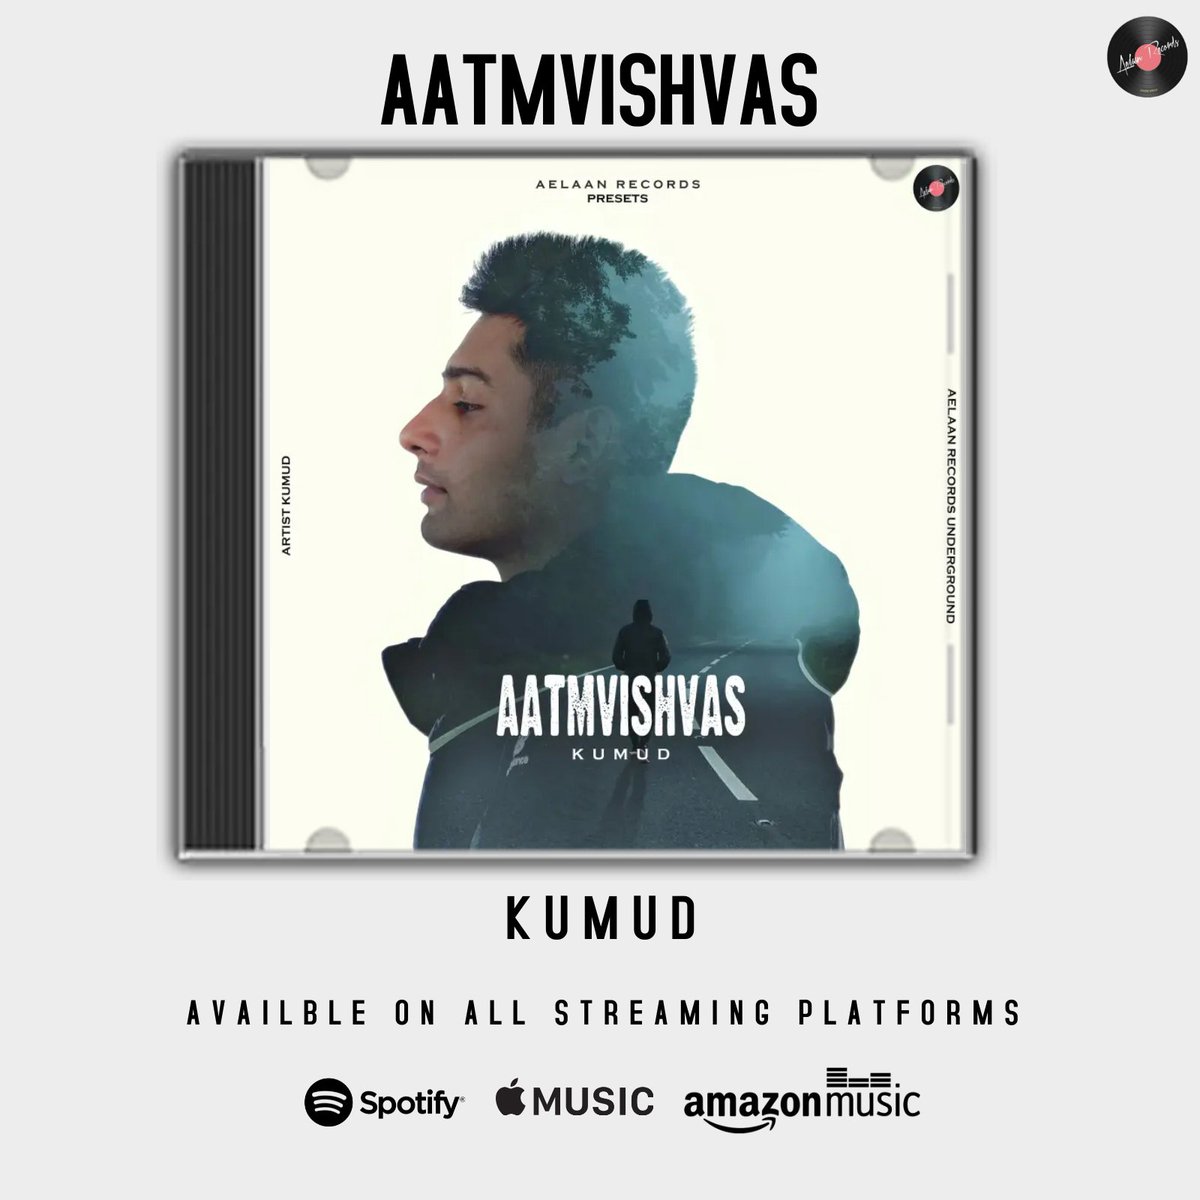 #AATMVISHVAS by #KUMUD is available on all major music streaming platforms
just go n check it out🎧

#aelaanrecords #aelaanrecordsunderground #artist #desihiphop #dhh #hindirap #hiphop #indianhiphop #indianrap #indianrappers #rap #rapmusic #rappers #underground #undergroundartist